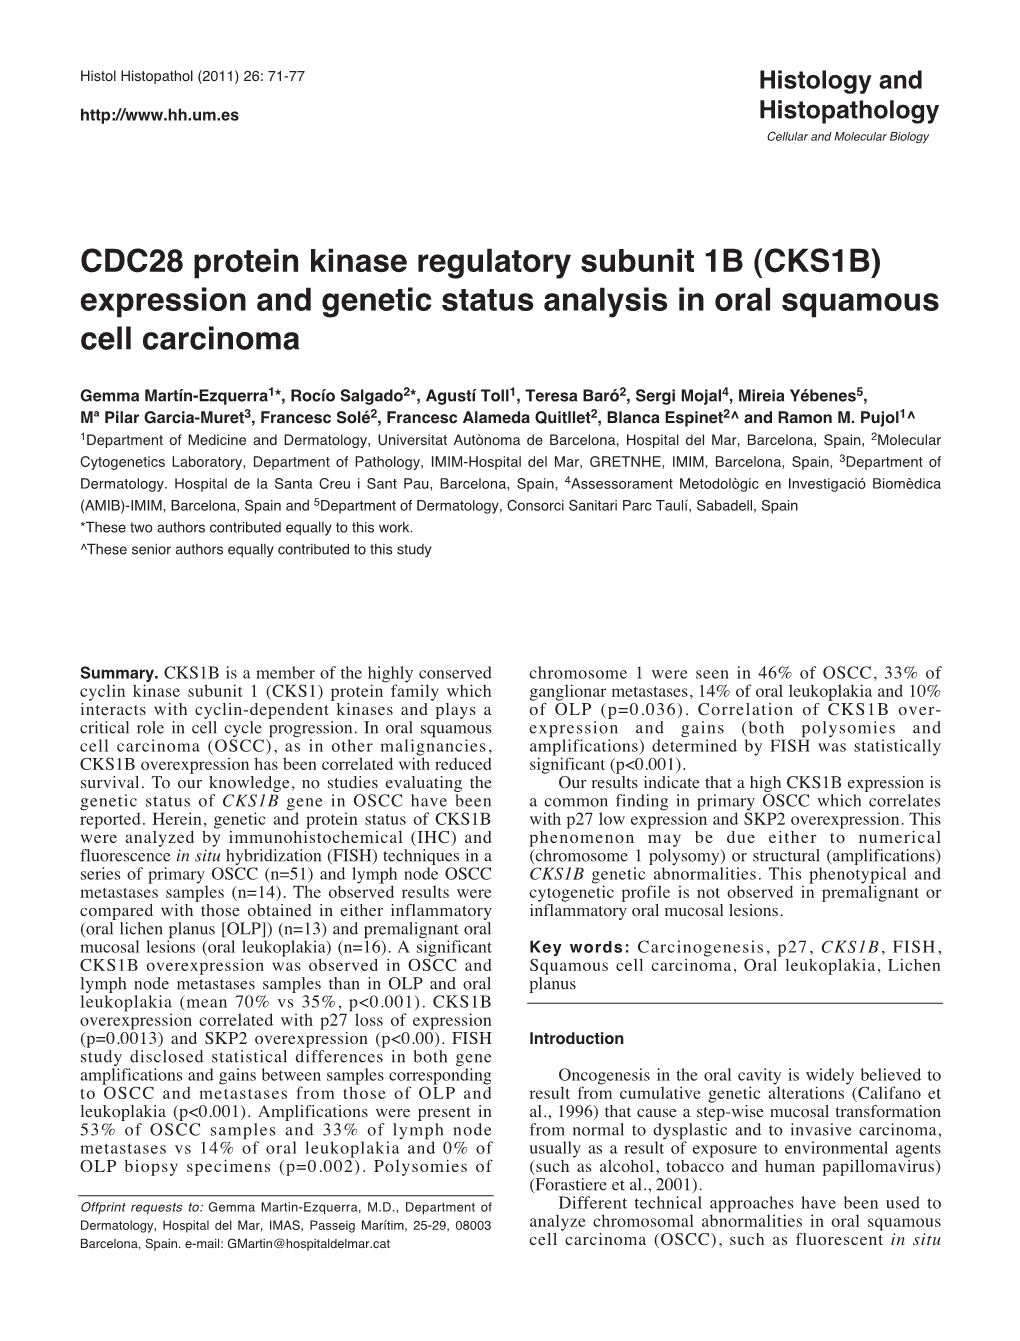 CDC28 Protein Kinase Regulatory Subunit 1B (CKS1B) Expression and Genetic Status Analysis in Oral Squamous Cell Carcinoma